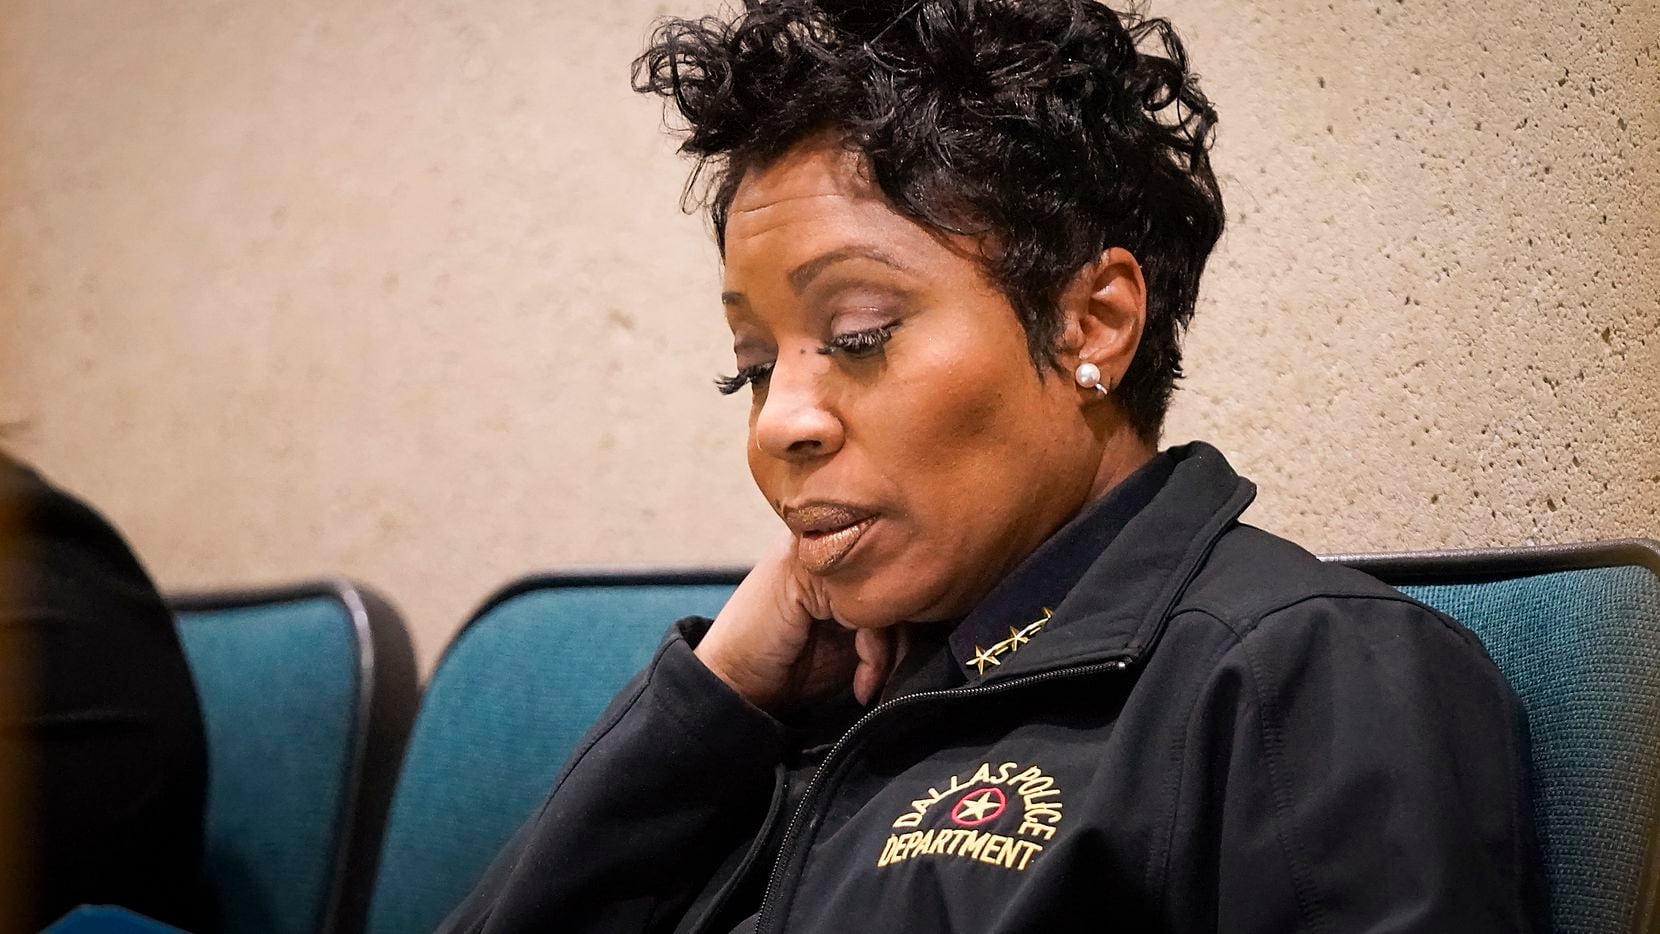 Dallas Police Chief U. Renee Hall listens in during a City Council meeting on Jan. 8, 2020, in Dallas.